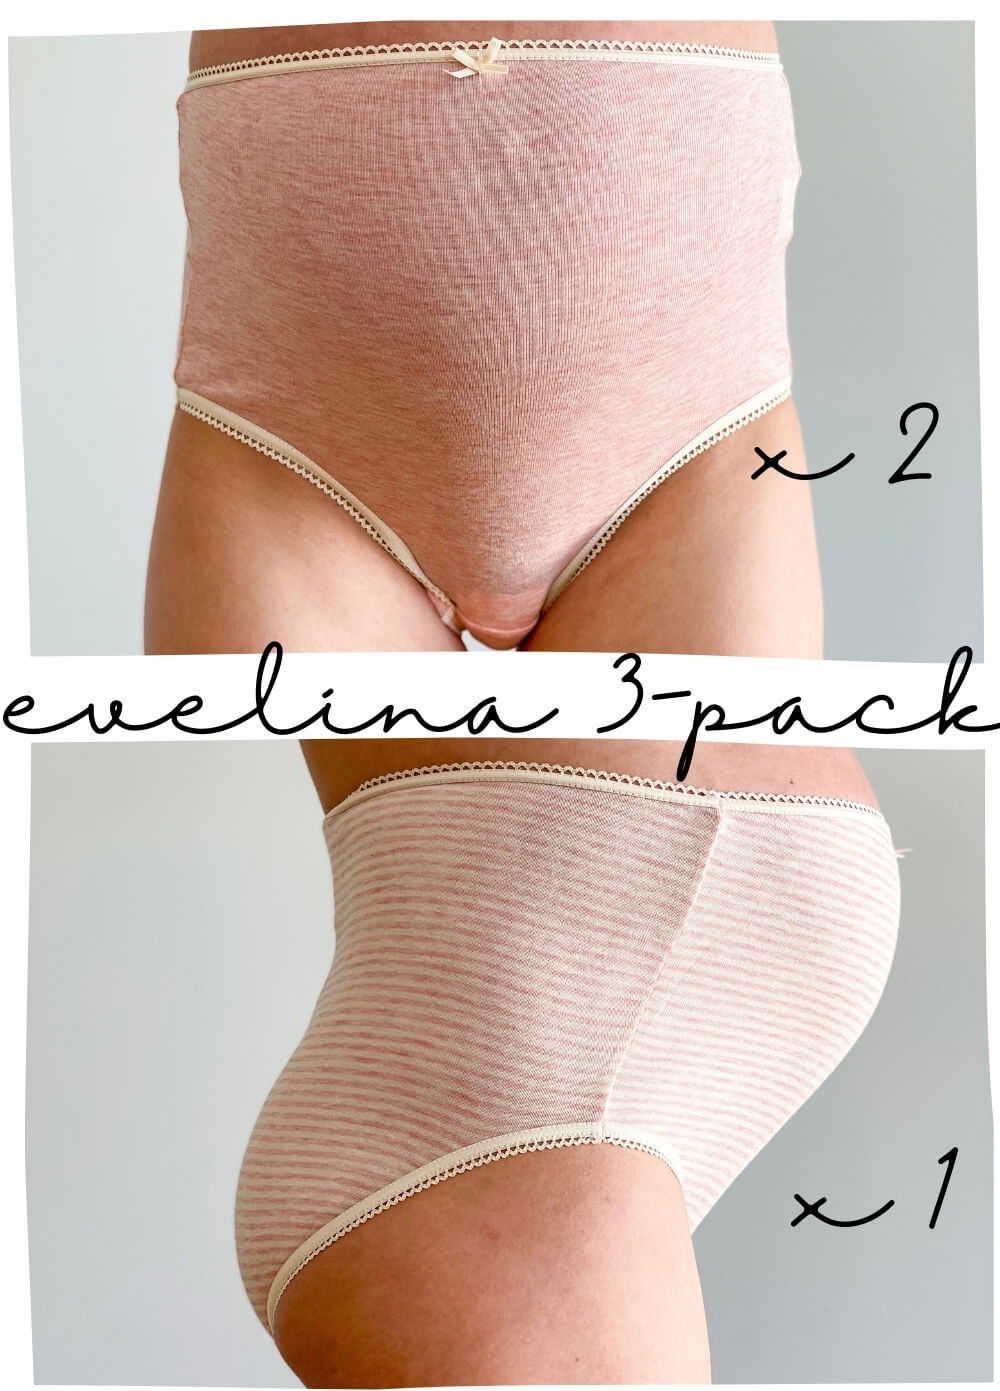 QueenBee® - Evelina 3-pack Briefs in Pink Stripes